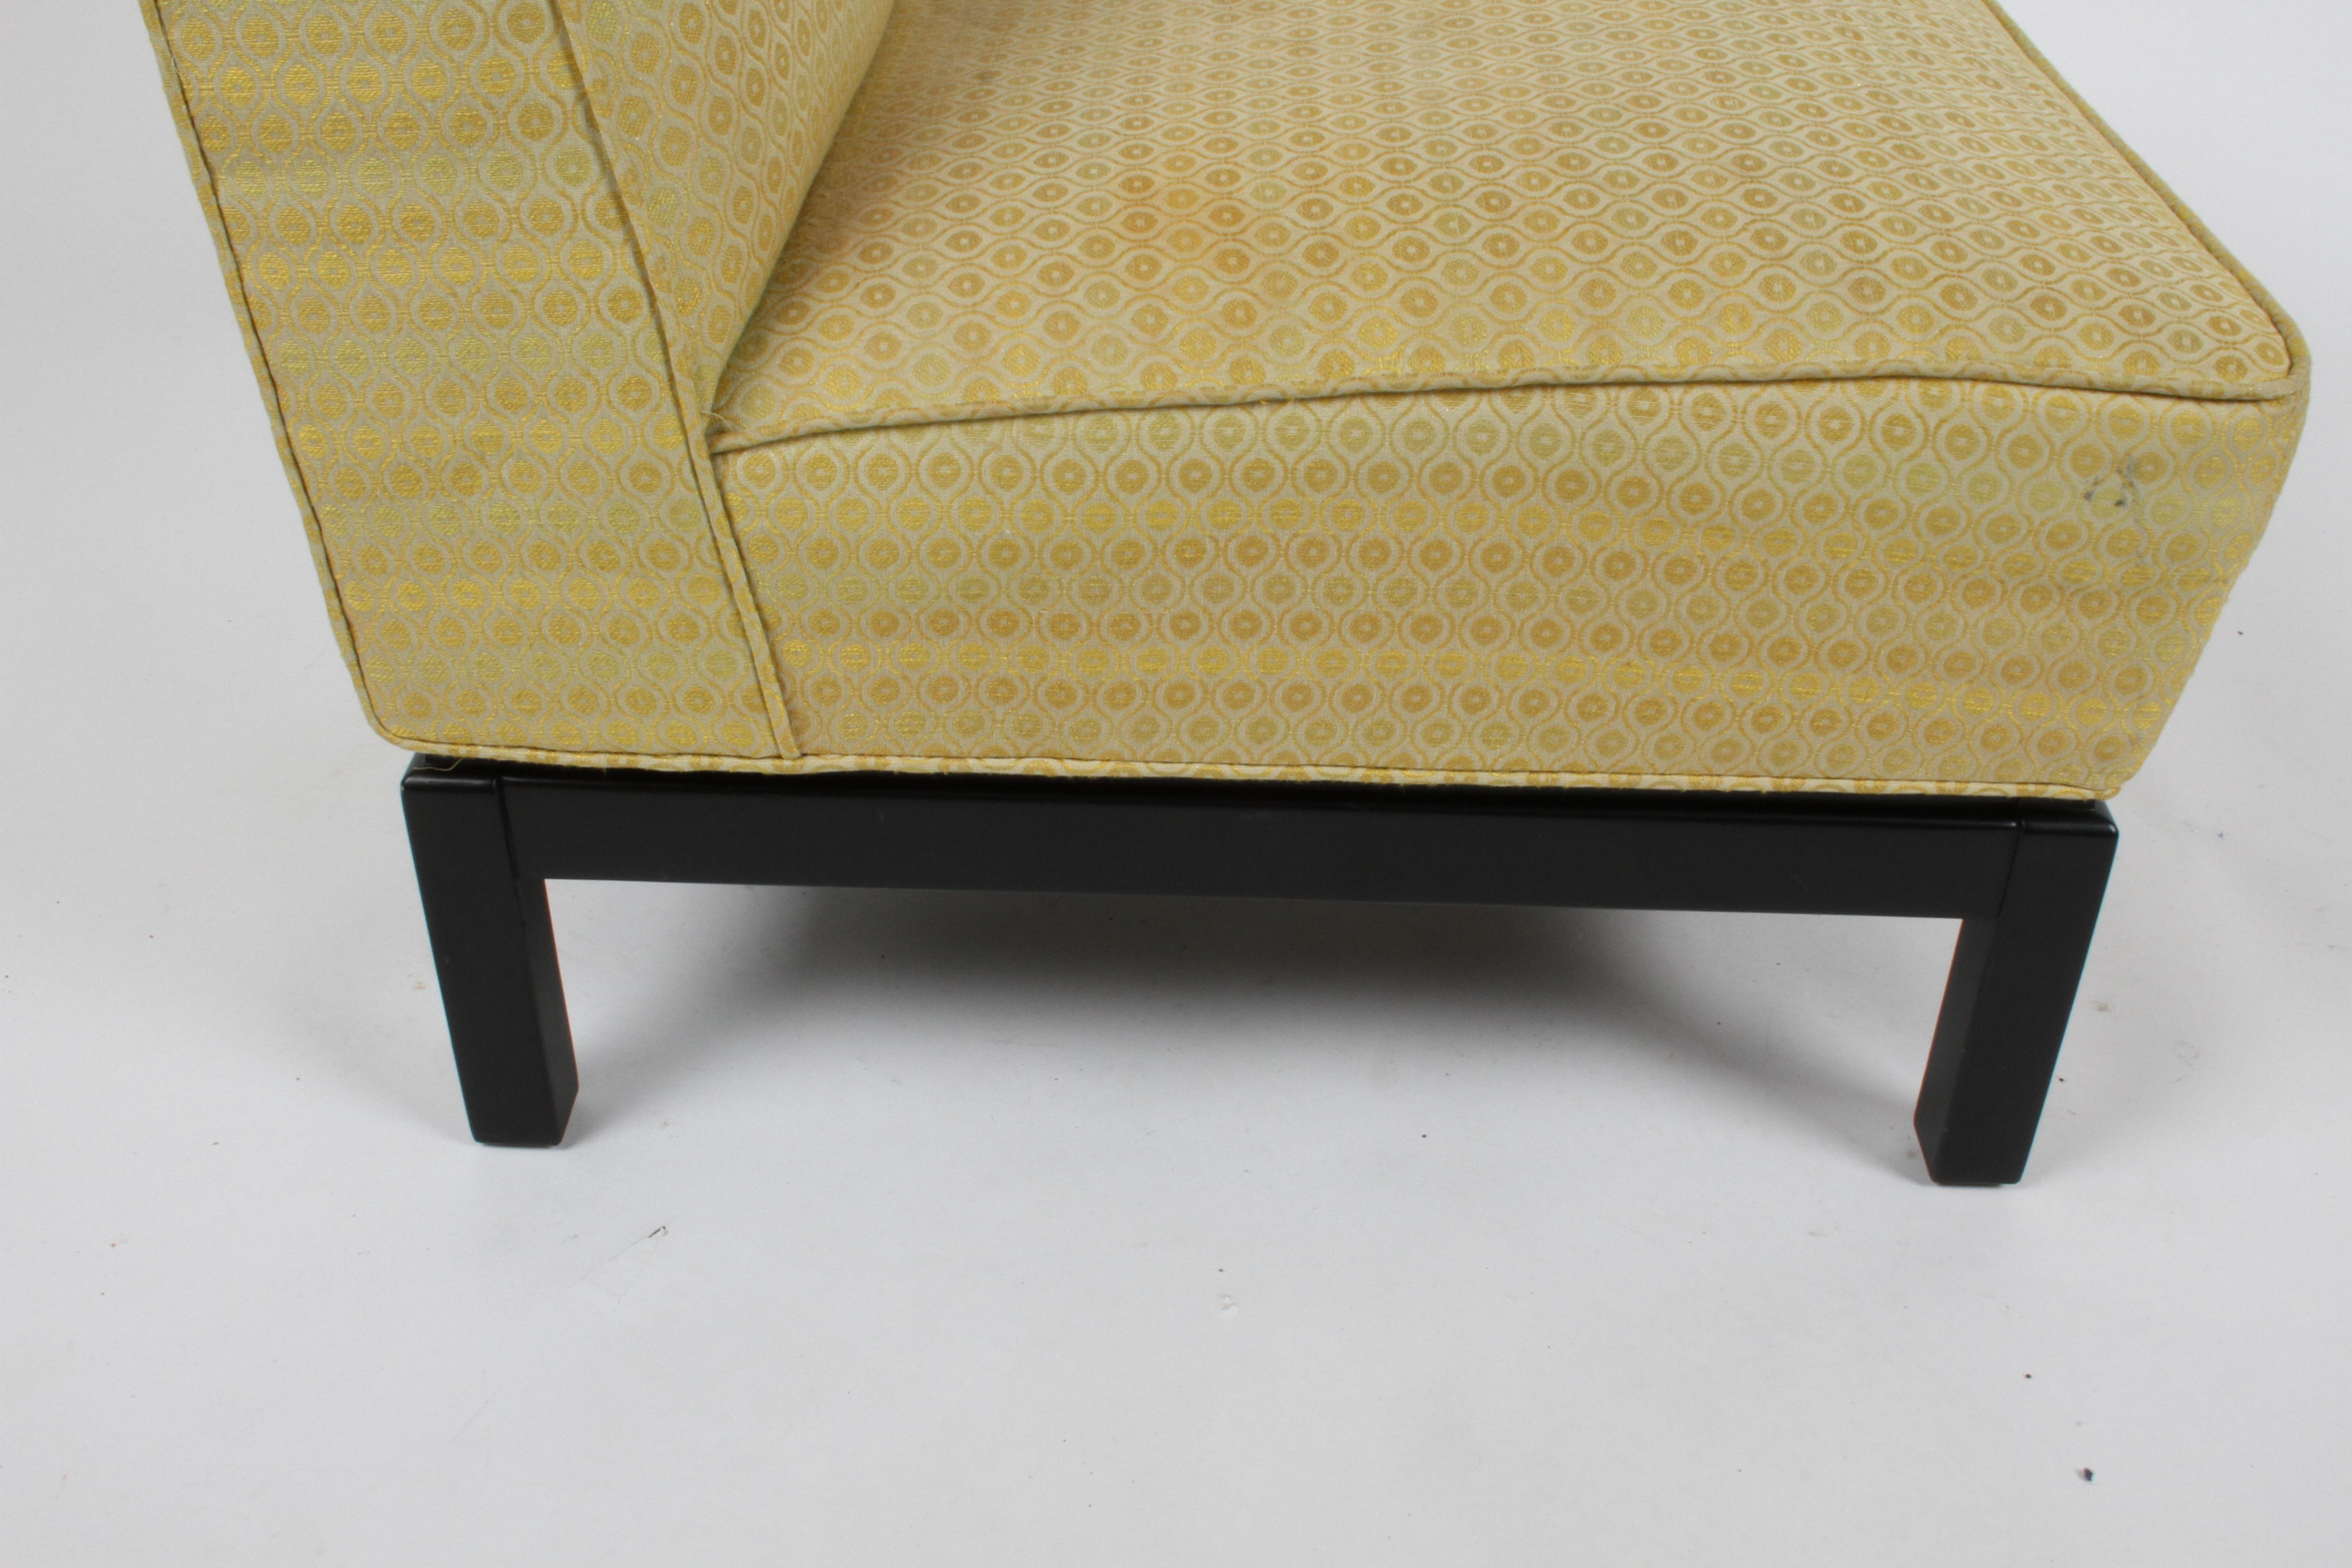 Upholstery Mid-Century Modern Slipper Chairs with Ebony Bases up to 3 Available For Sale